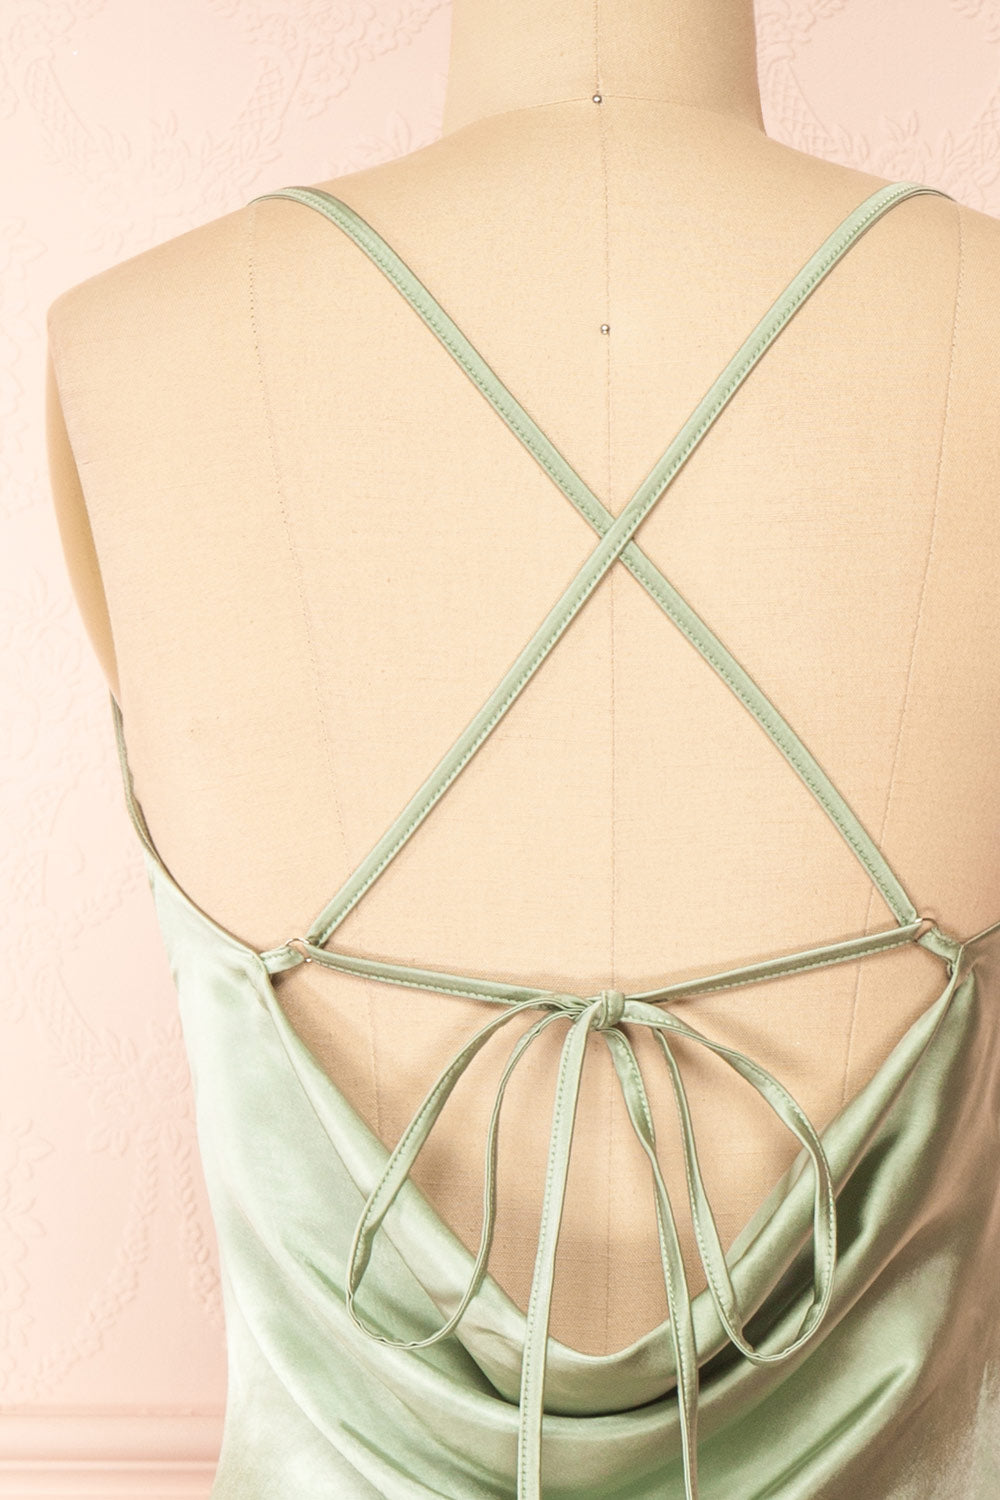 Vintage Green Slip Dress - Blended Fabric - 4 Sizes Available - ApolloBox